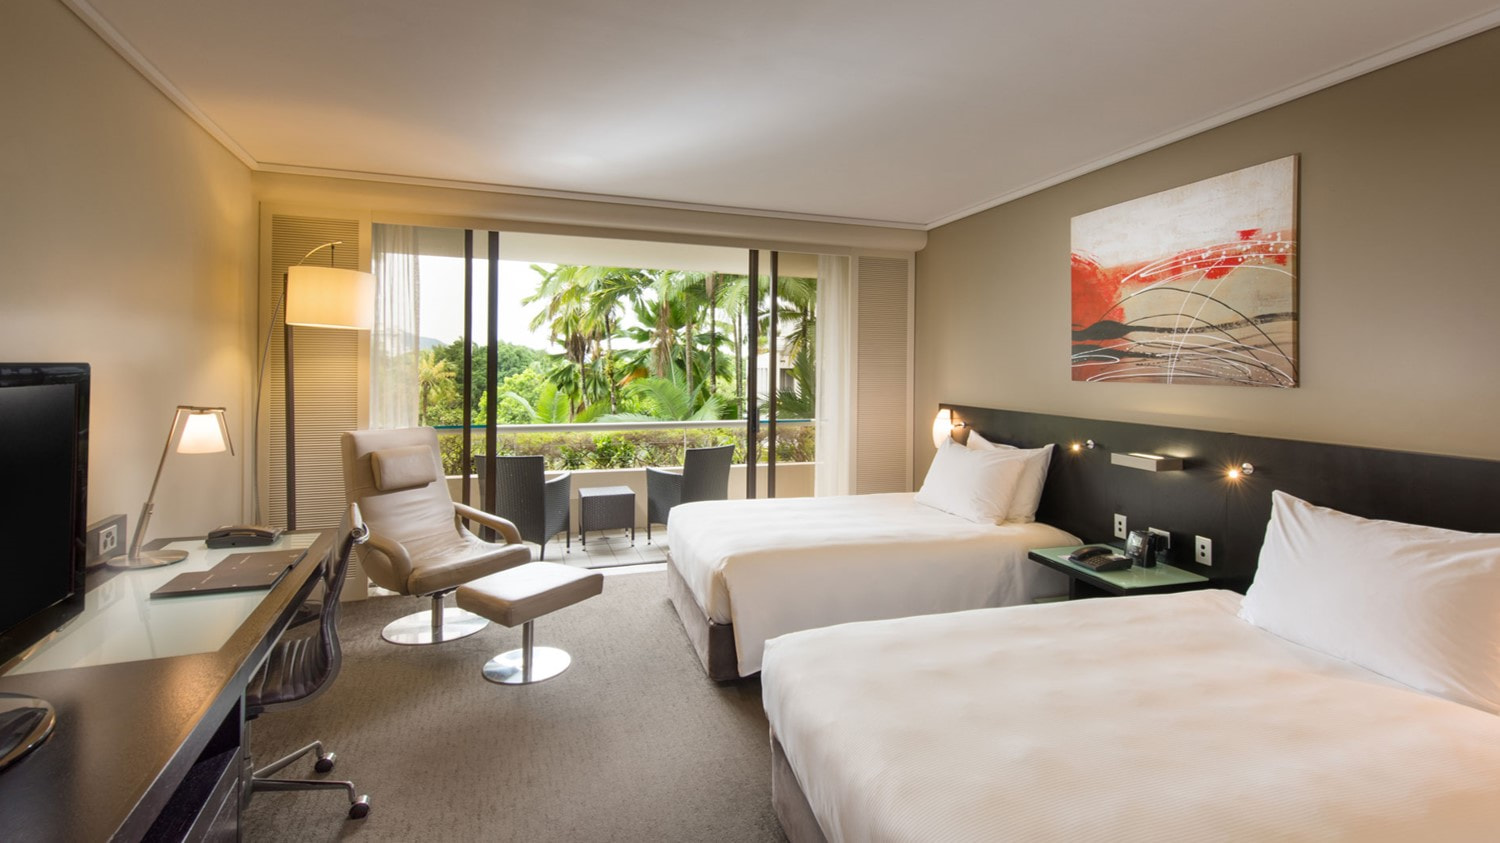 Double Tree by Hilton Cairns Room